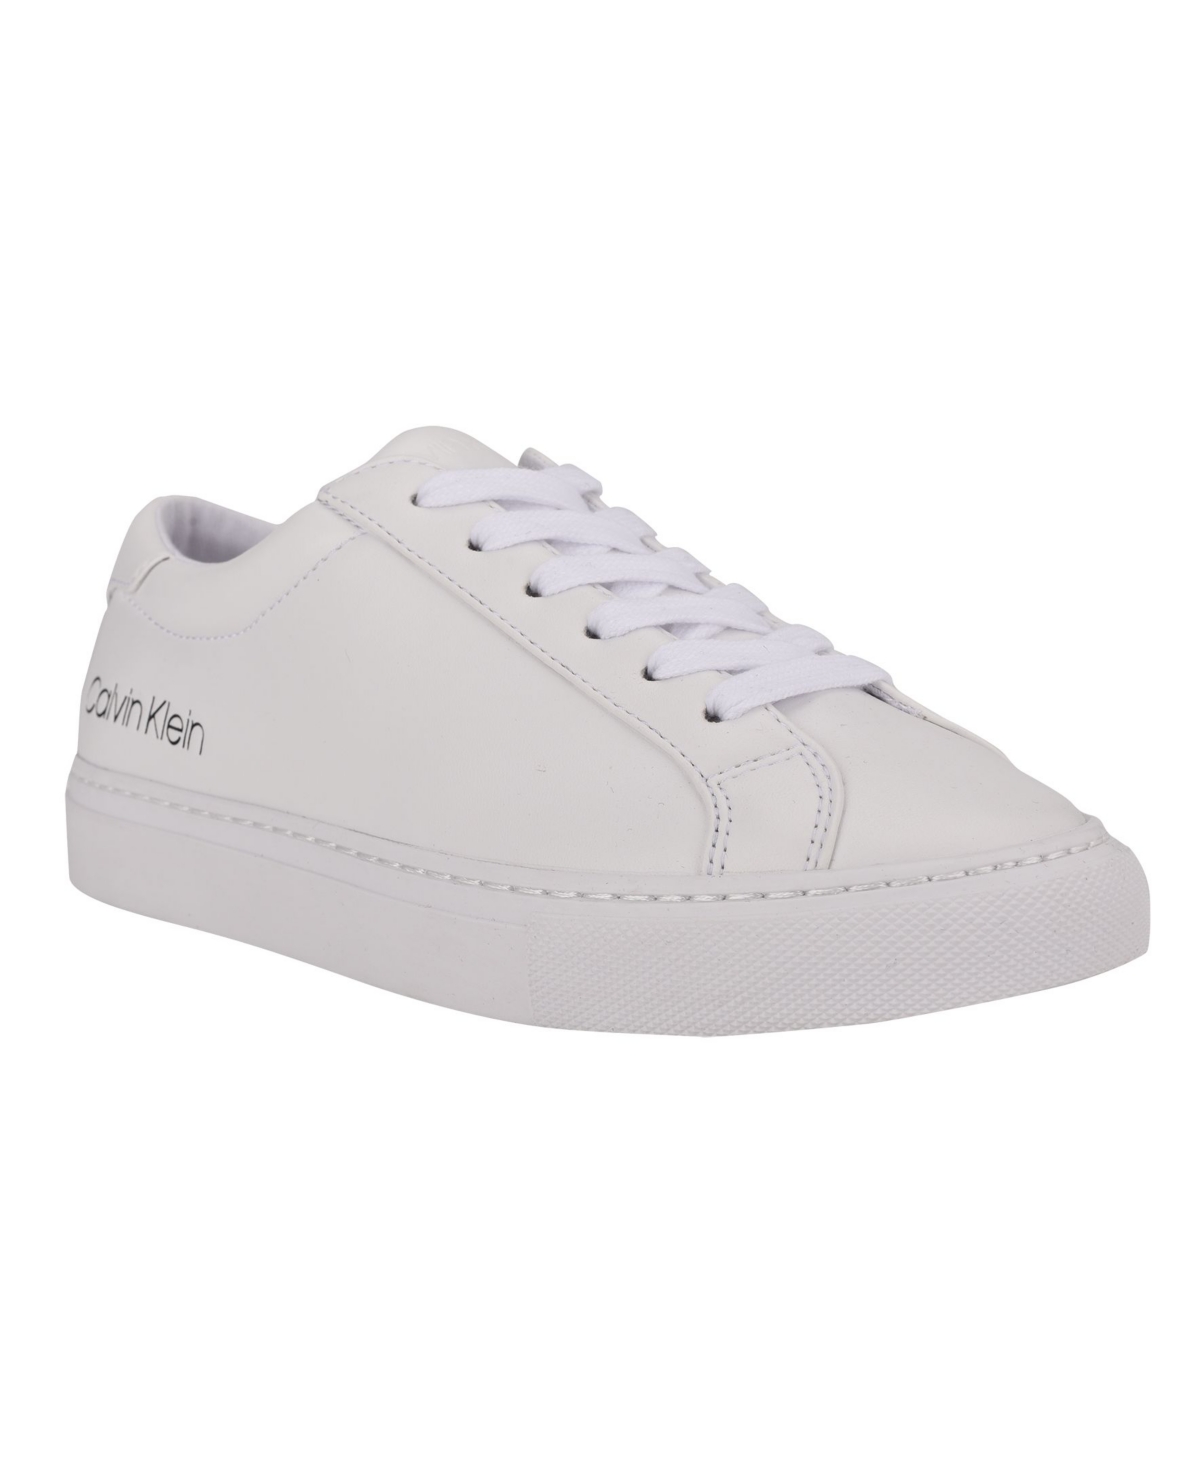 UPC 195182920496 product image for Calvin Klein Women's Gabe Lace-Up Sneakers Women's Shoes | upcitemdb.com